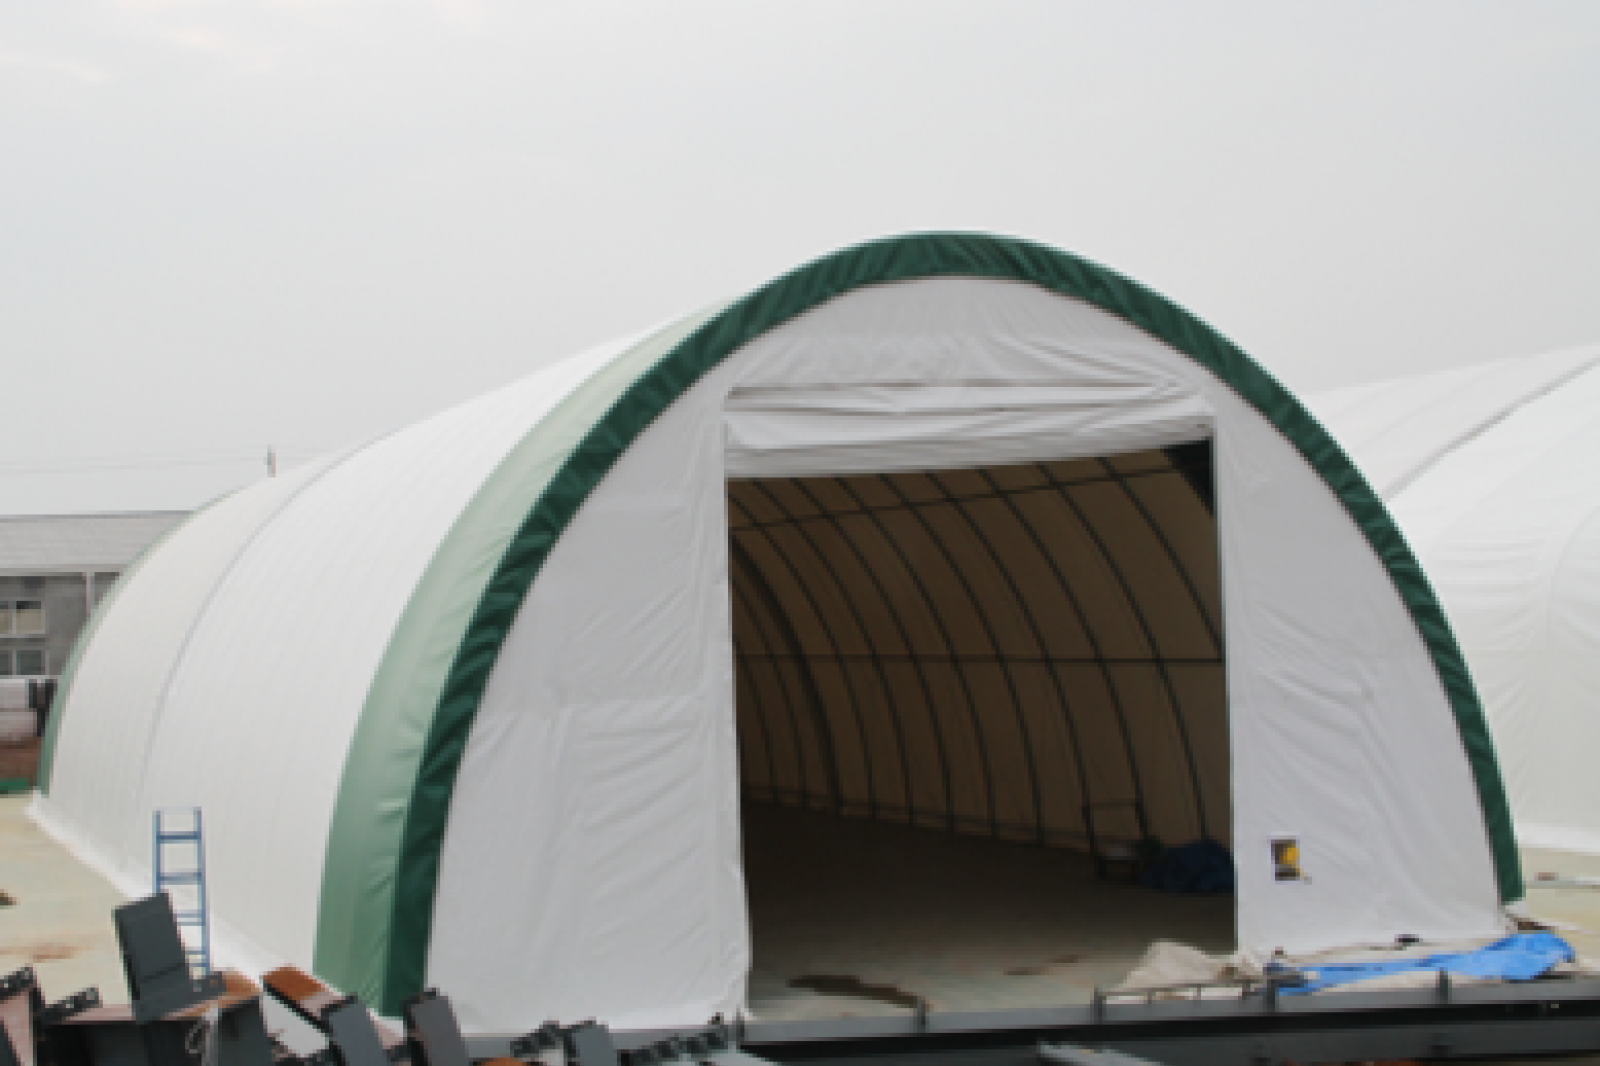 406020P/R 40ft x 60ft Single Trussed Storage Tent Thumbnail